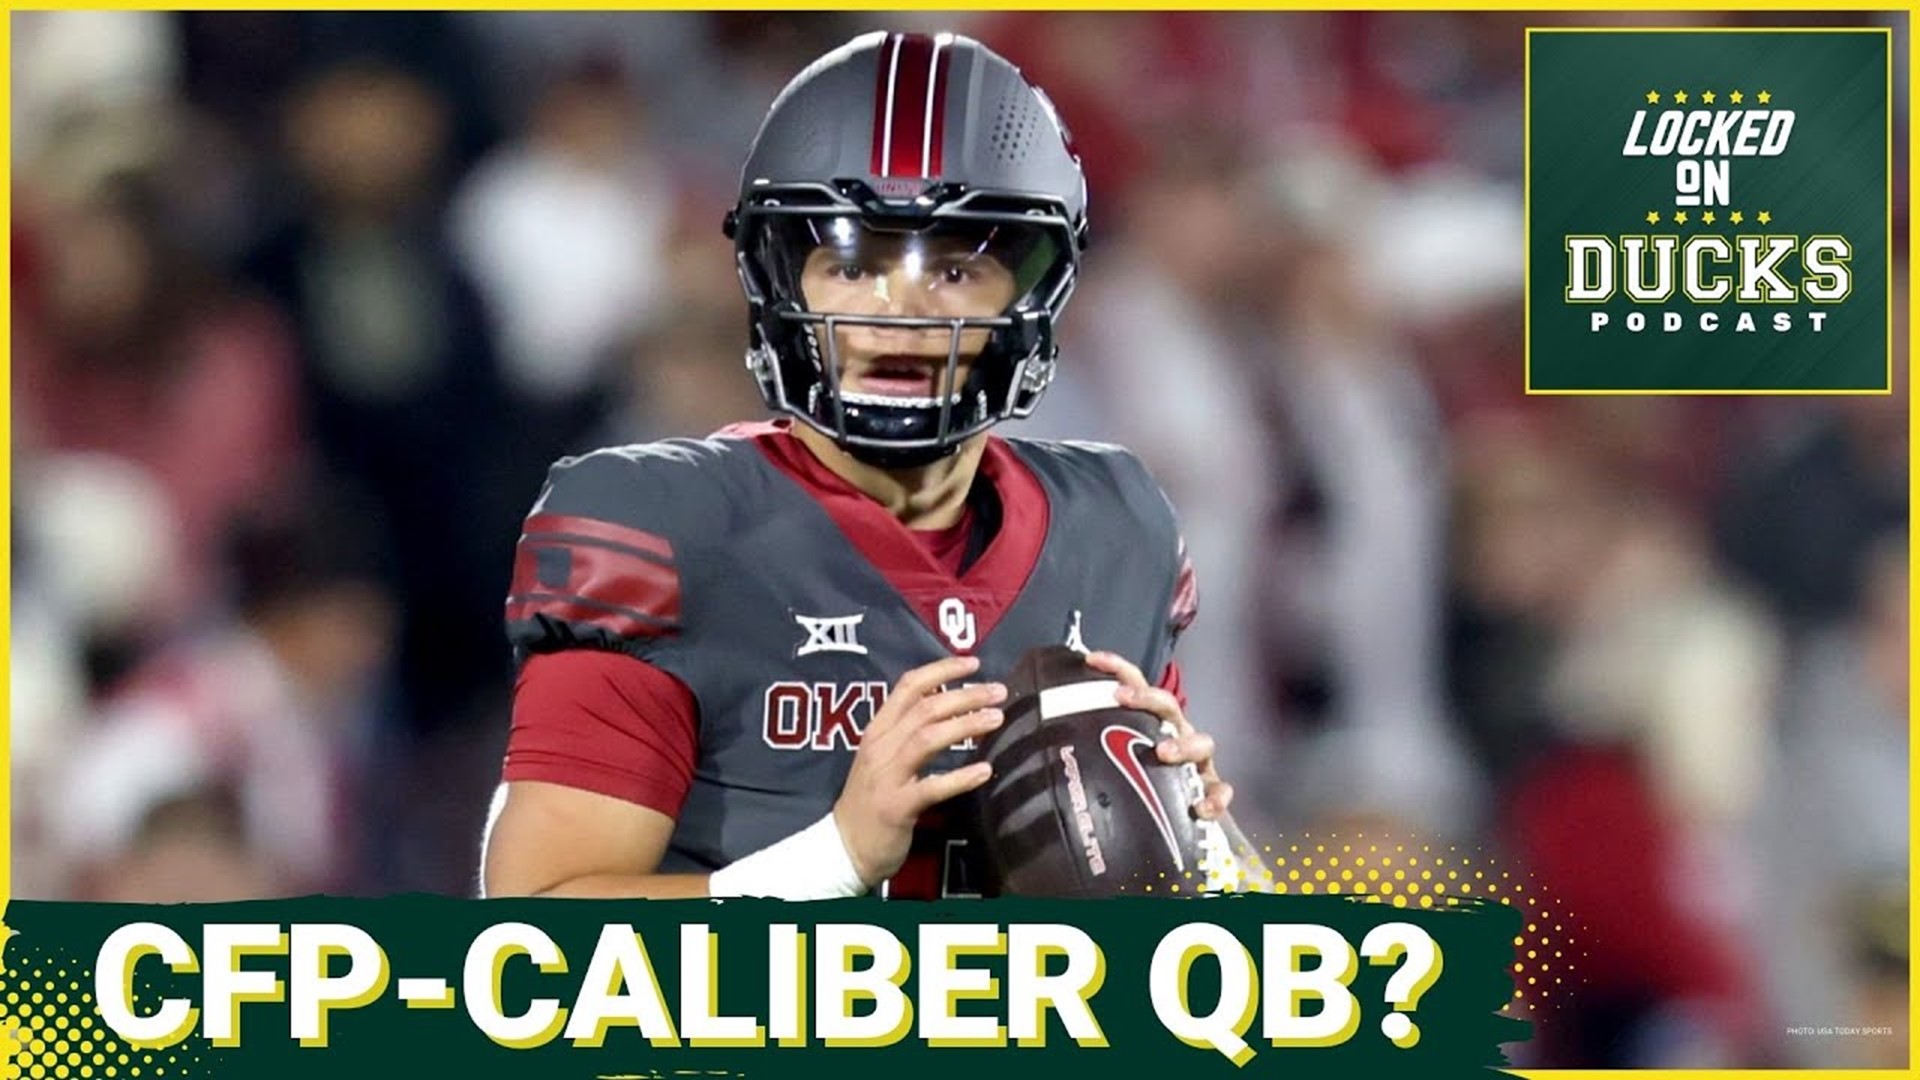 Oregon Football has made national headlines by landing former Oklahoma QB Dillon Gabriel, a highly sought after signal caller this cycle.